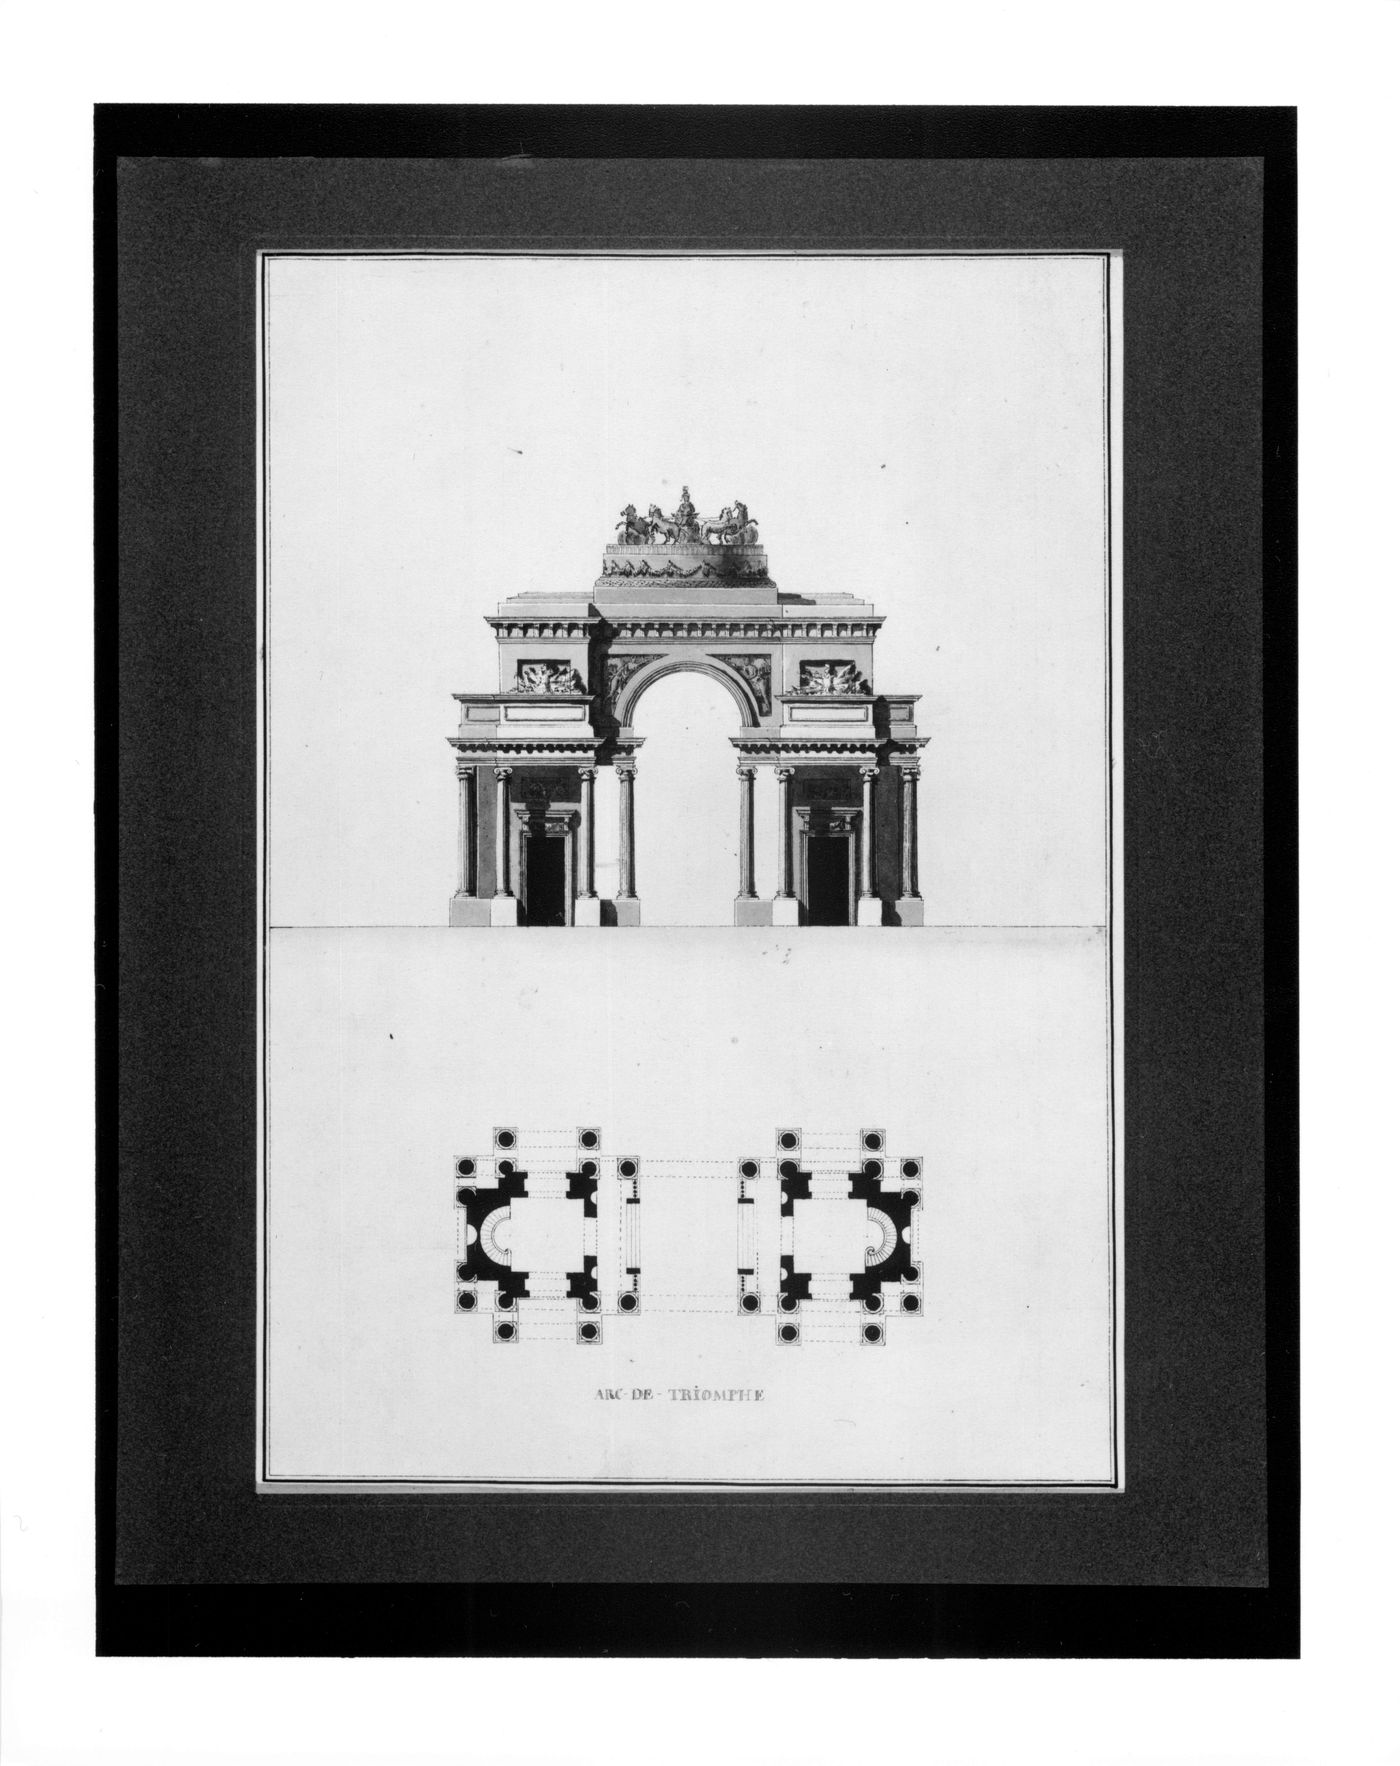 Triumphal arch - plan and elevation